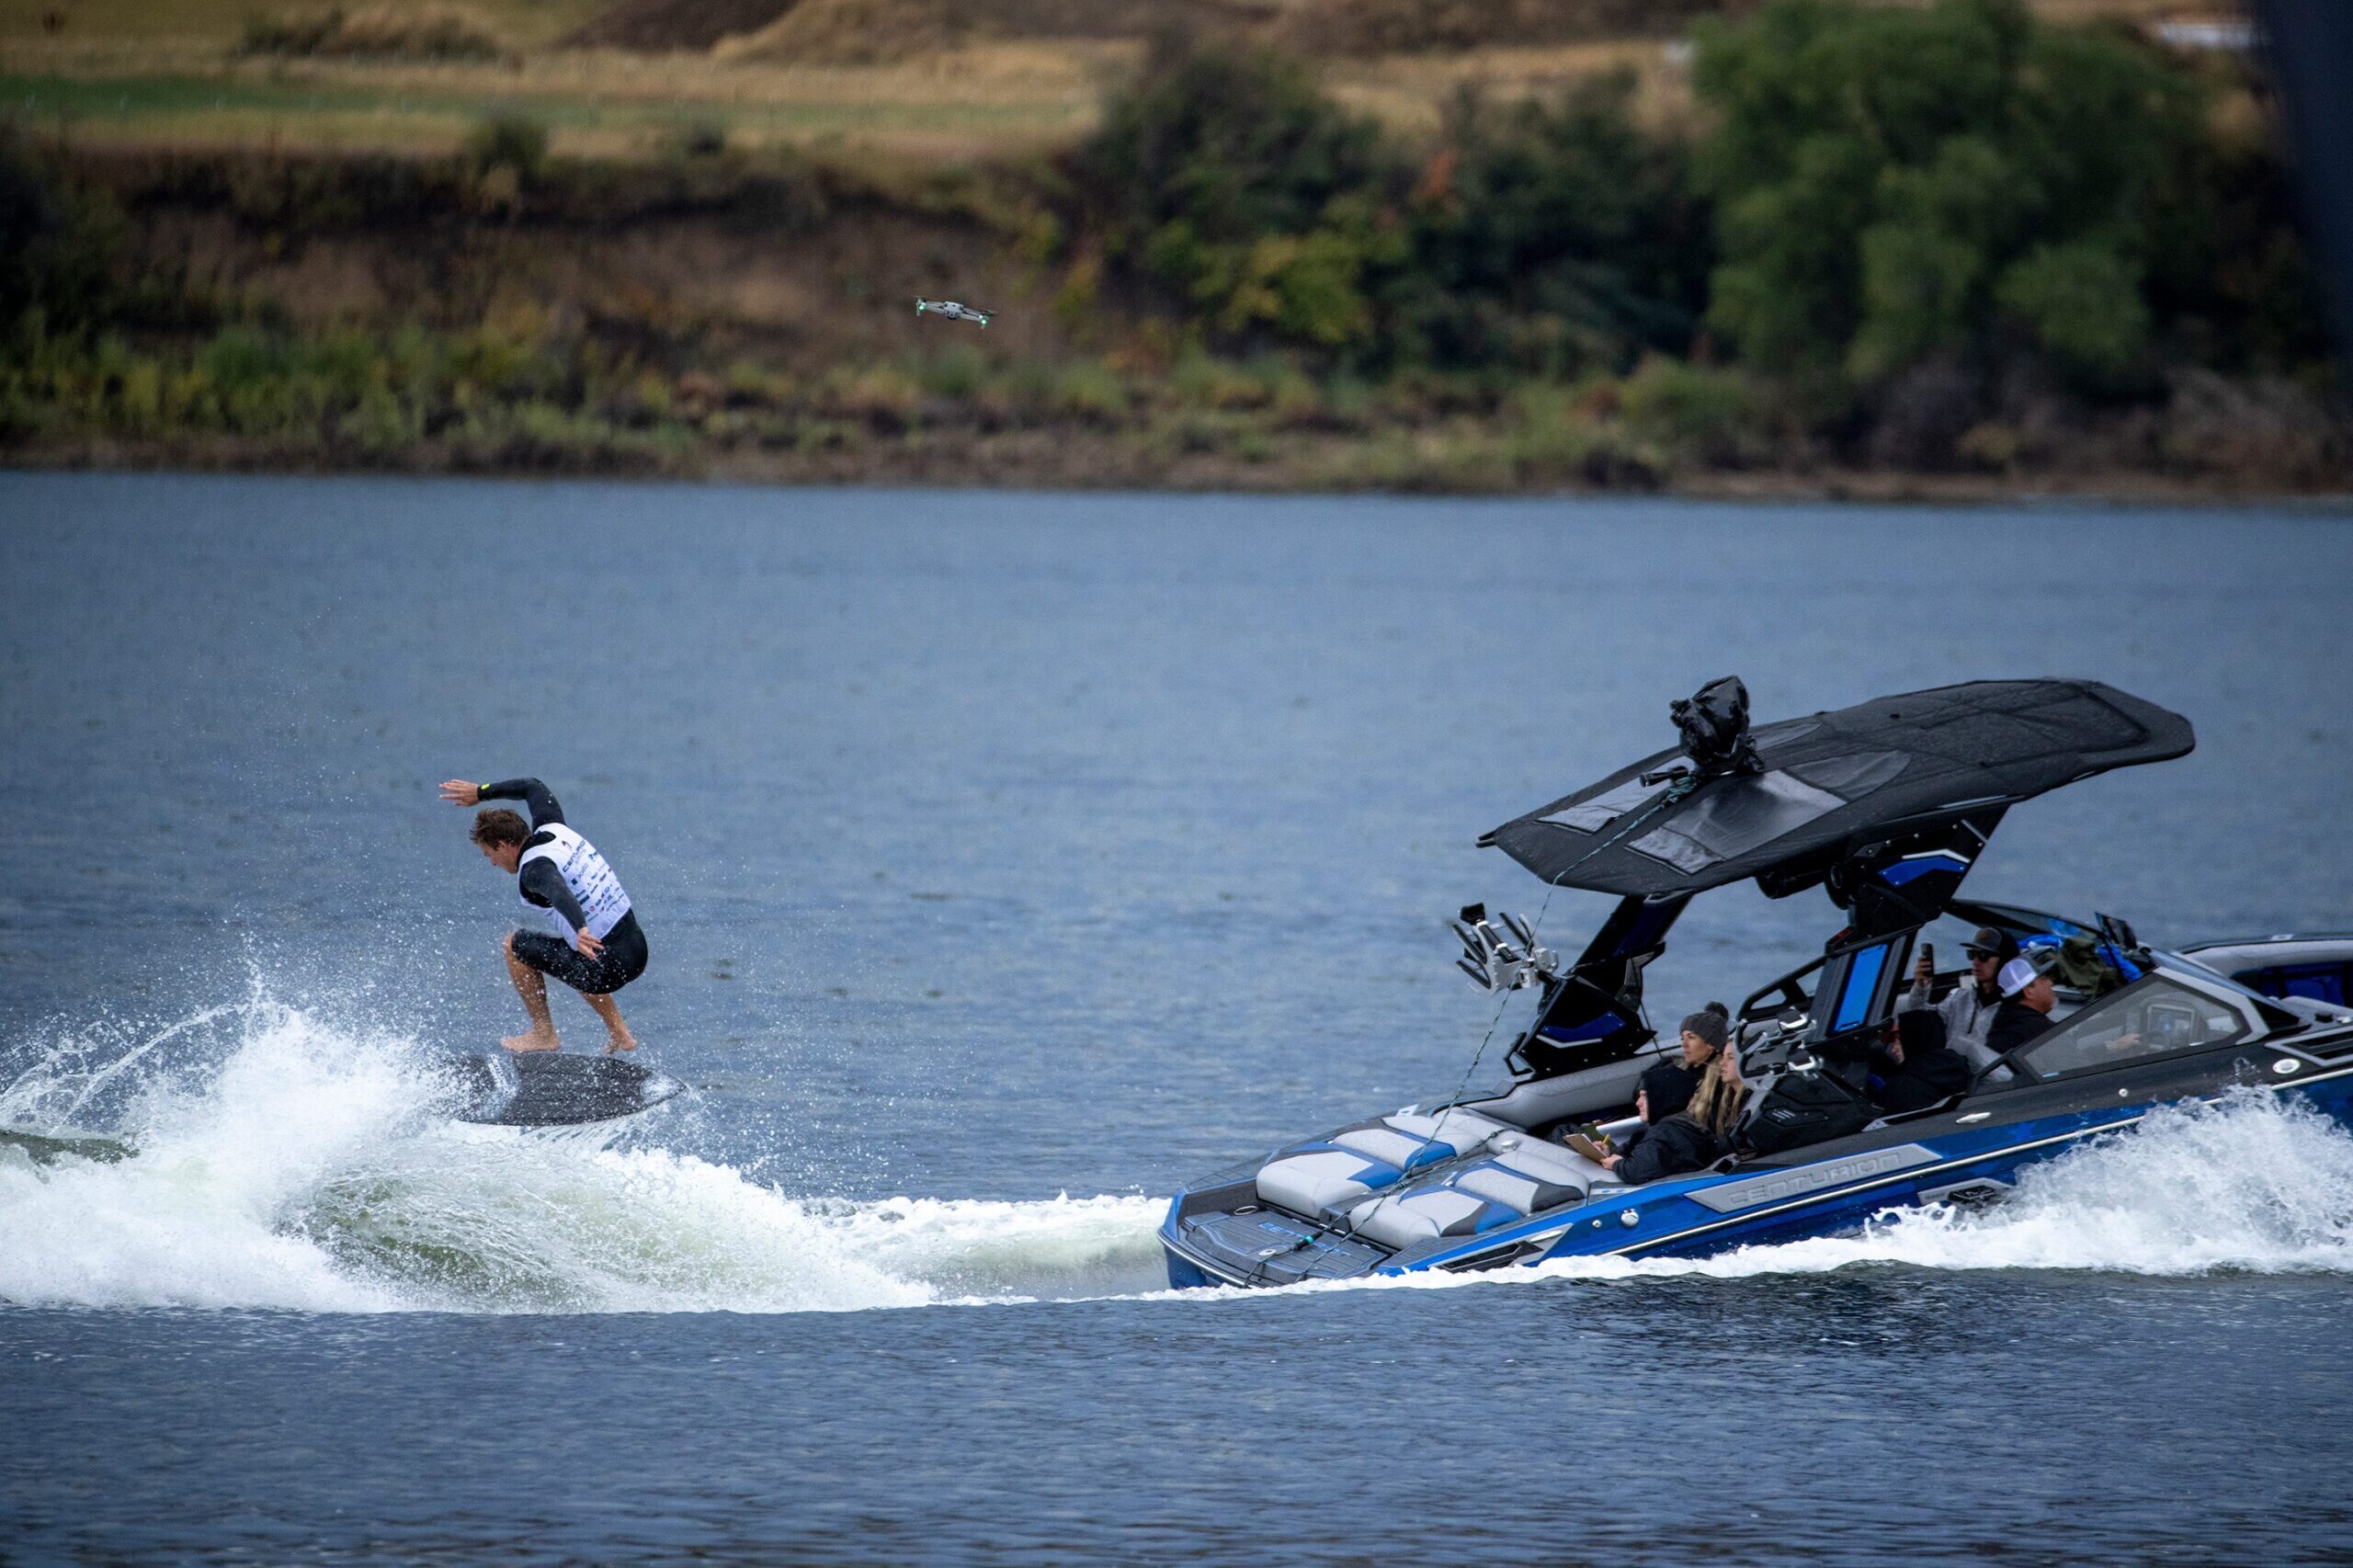 A man is competing in a wakeboarding contest, riding a wake board on a boat.